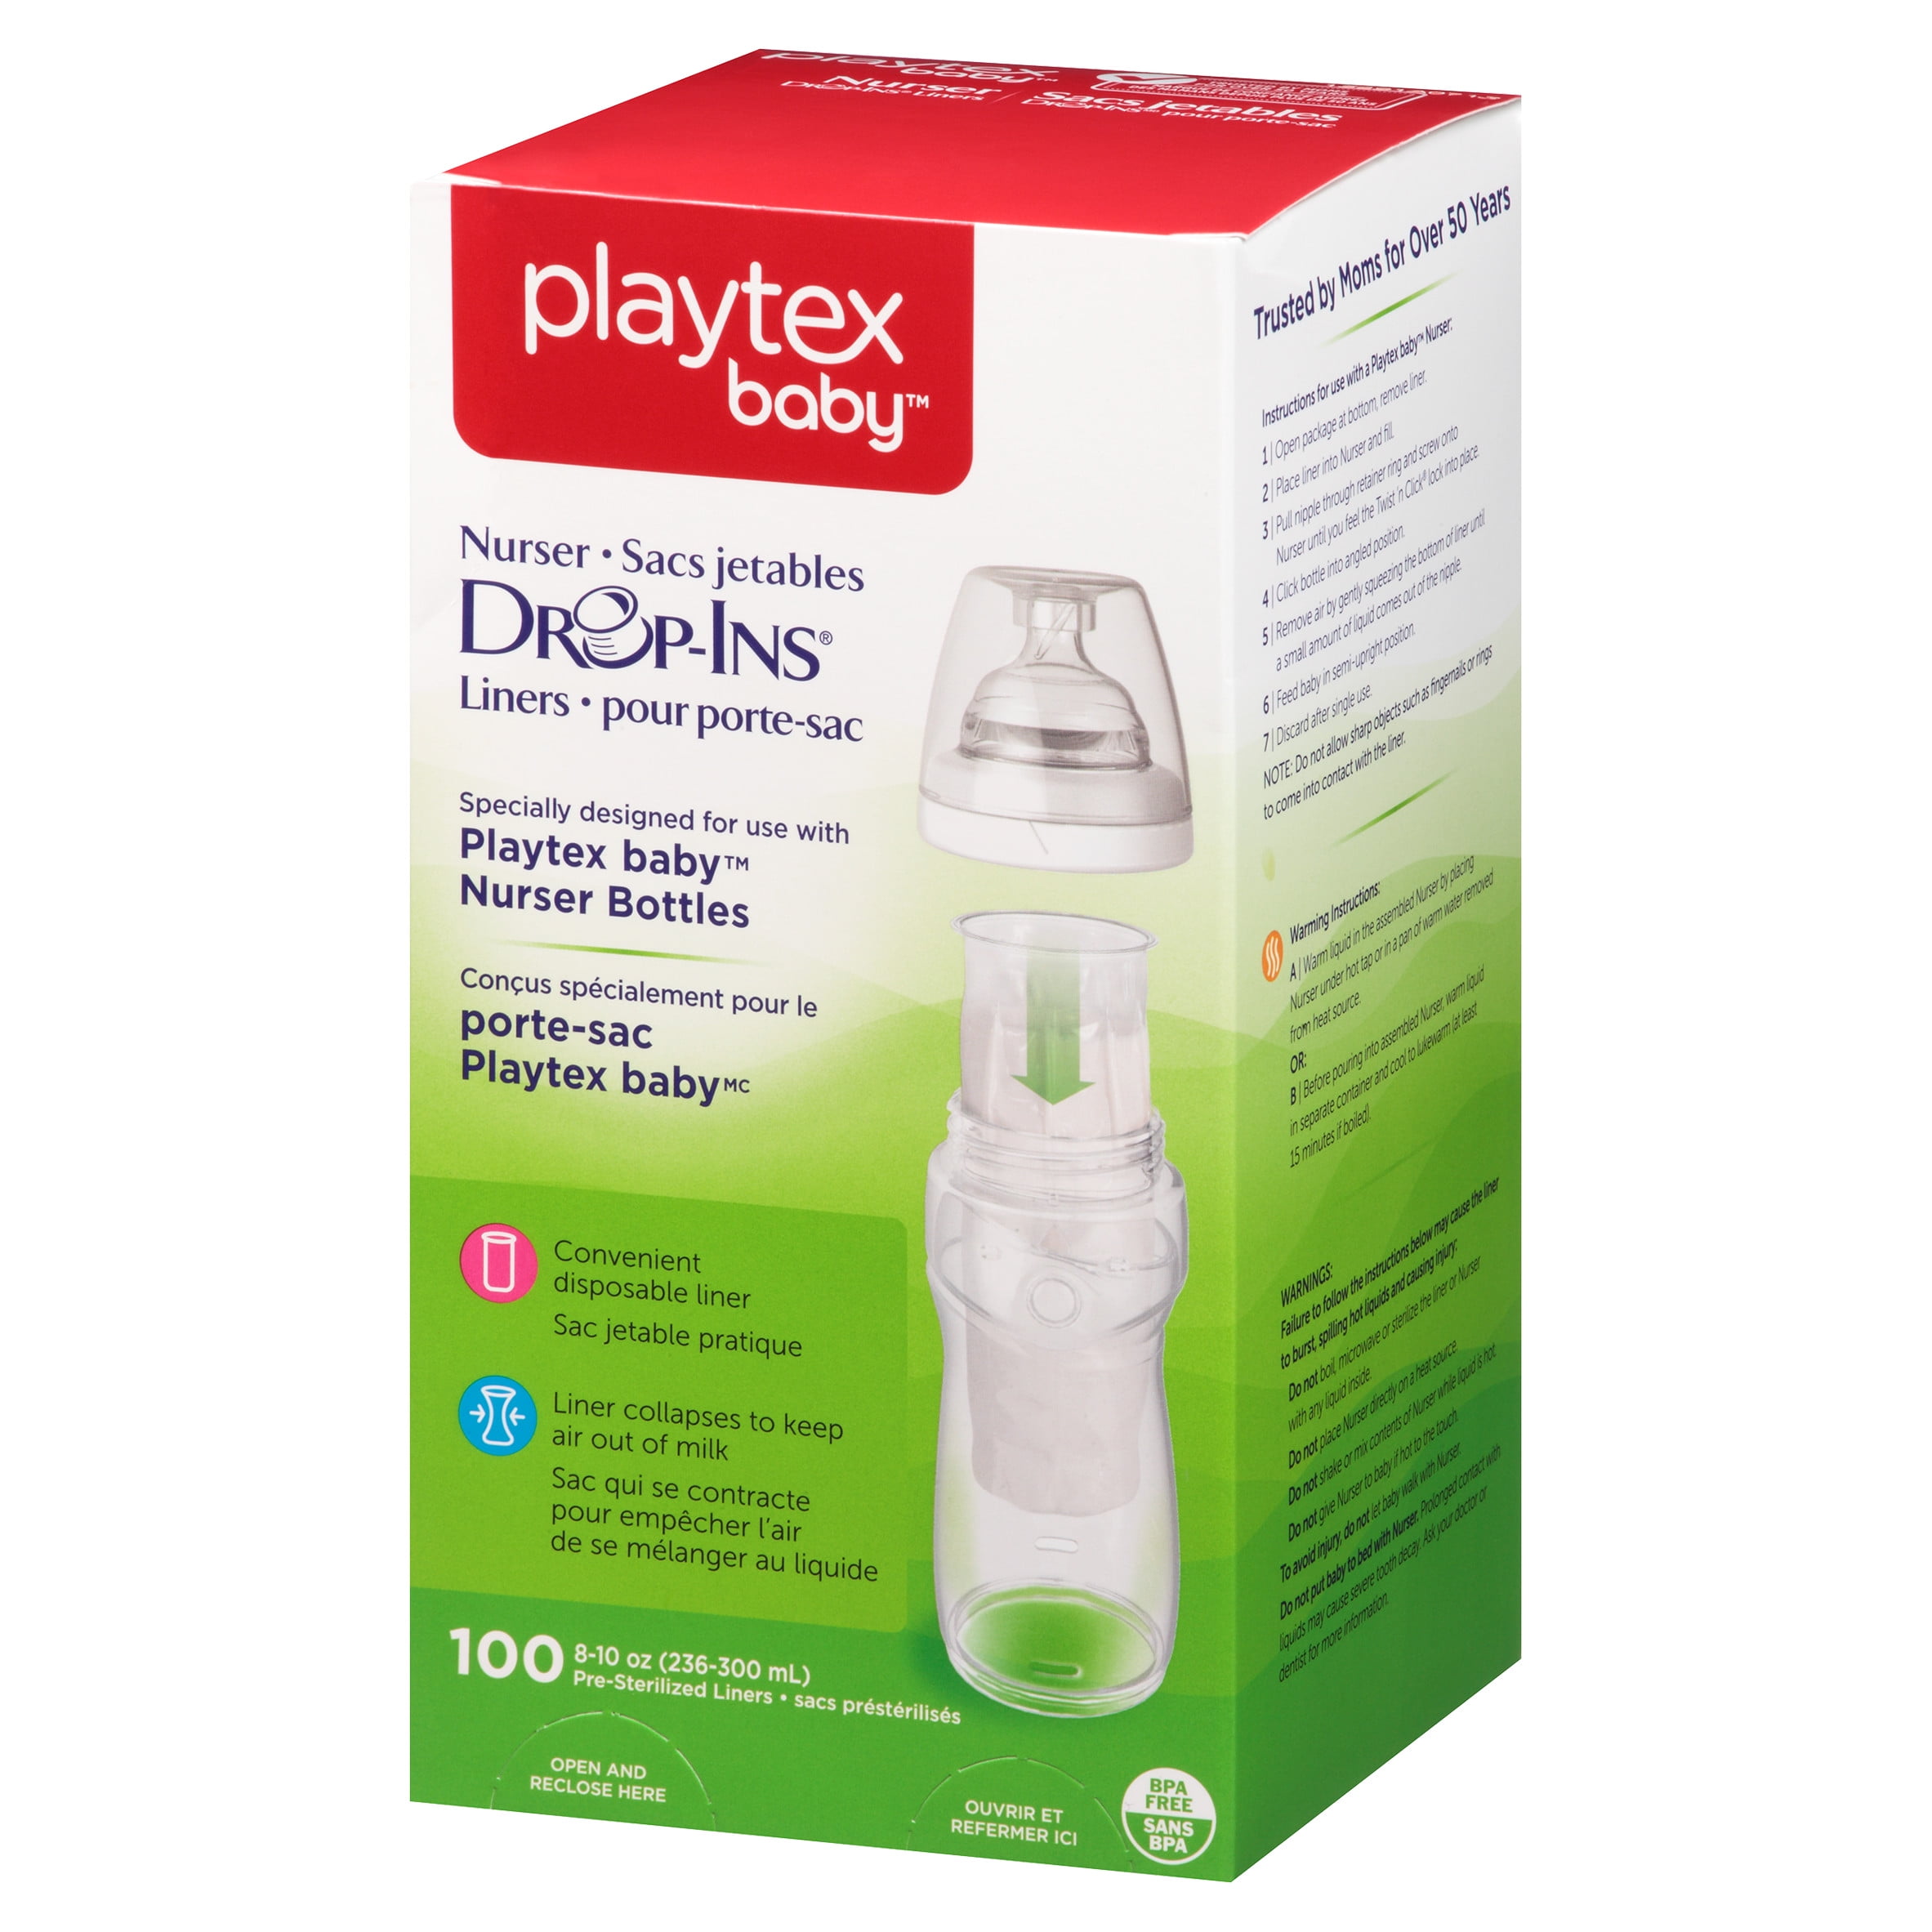 100 Count 8-10 oz New Playtex Nurser Bottle Liners Drop-Ins Free Shipping. 